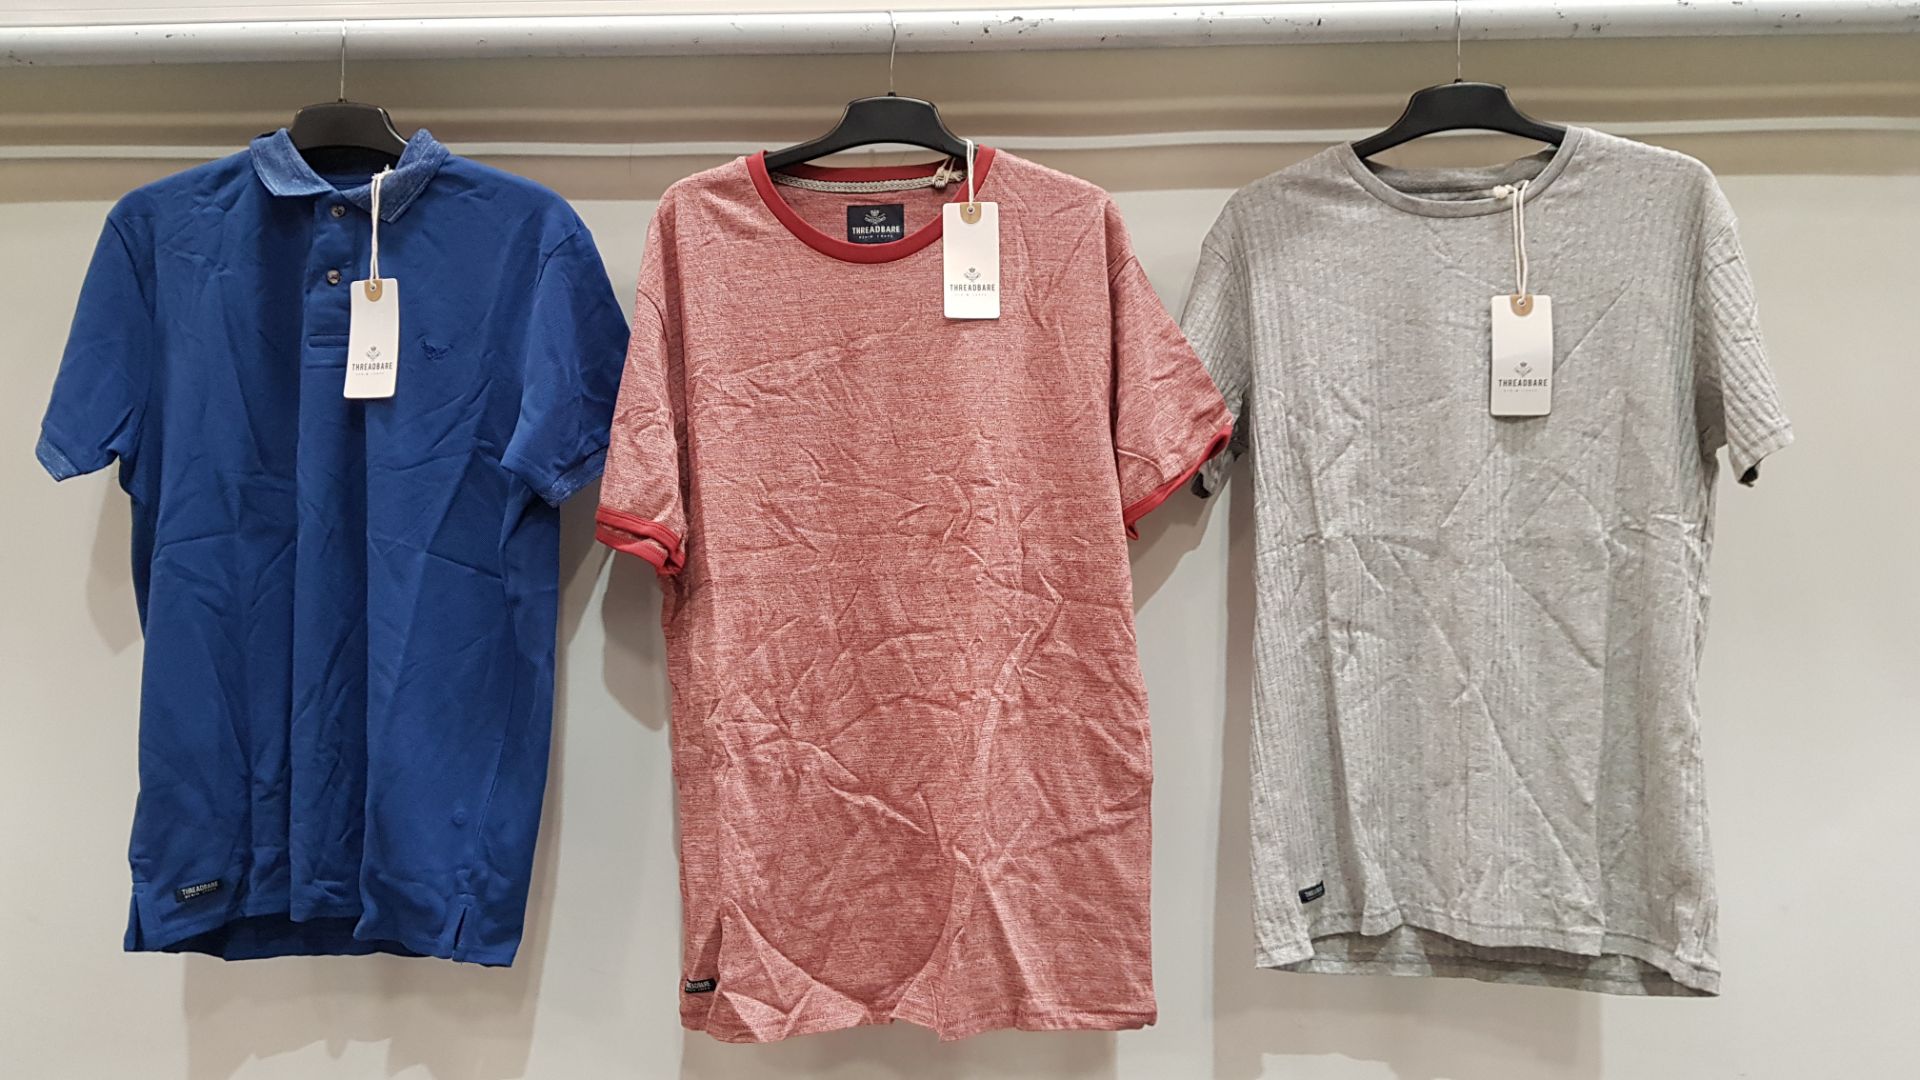 12 X BRAND NEW MIXED THREADBARE T SHIRTS IN MIXED STYLES AND SIZES - RRP EACH £18.99 - TOTAL £227.